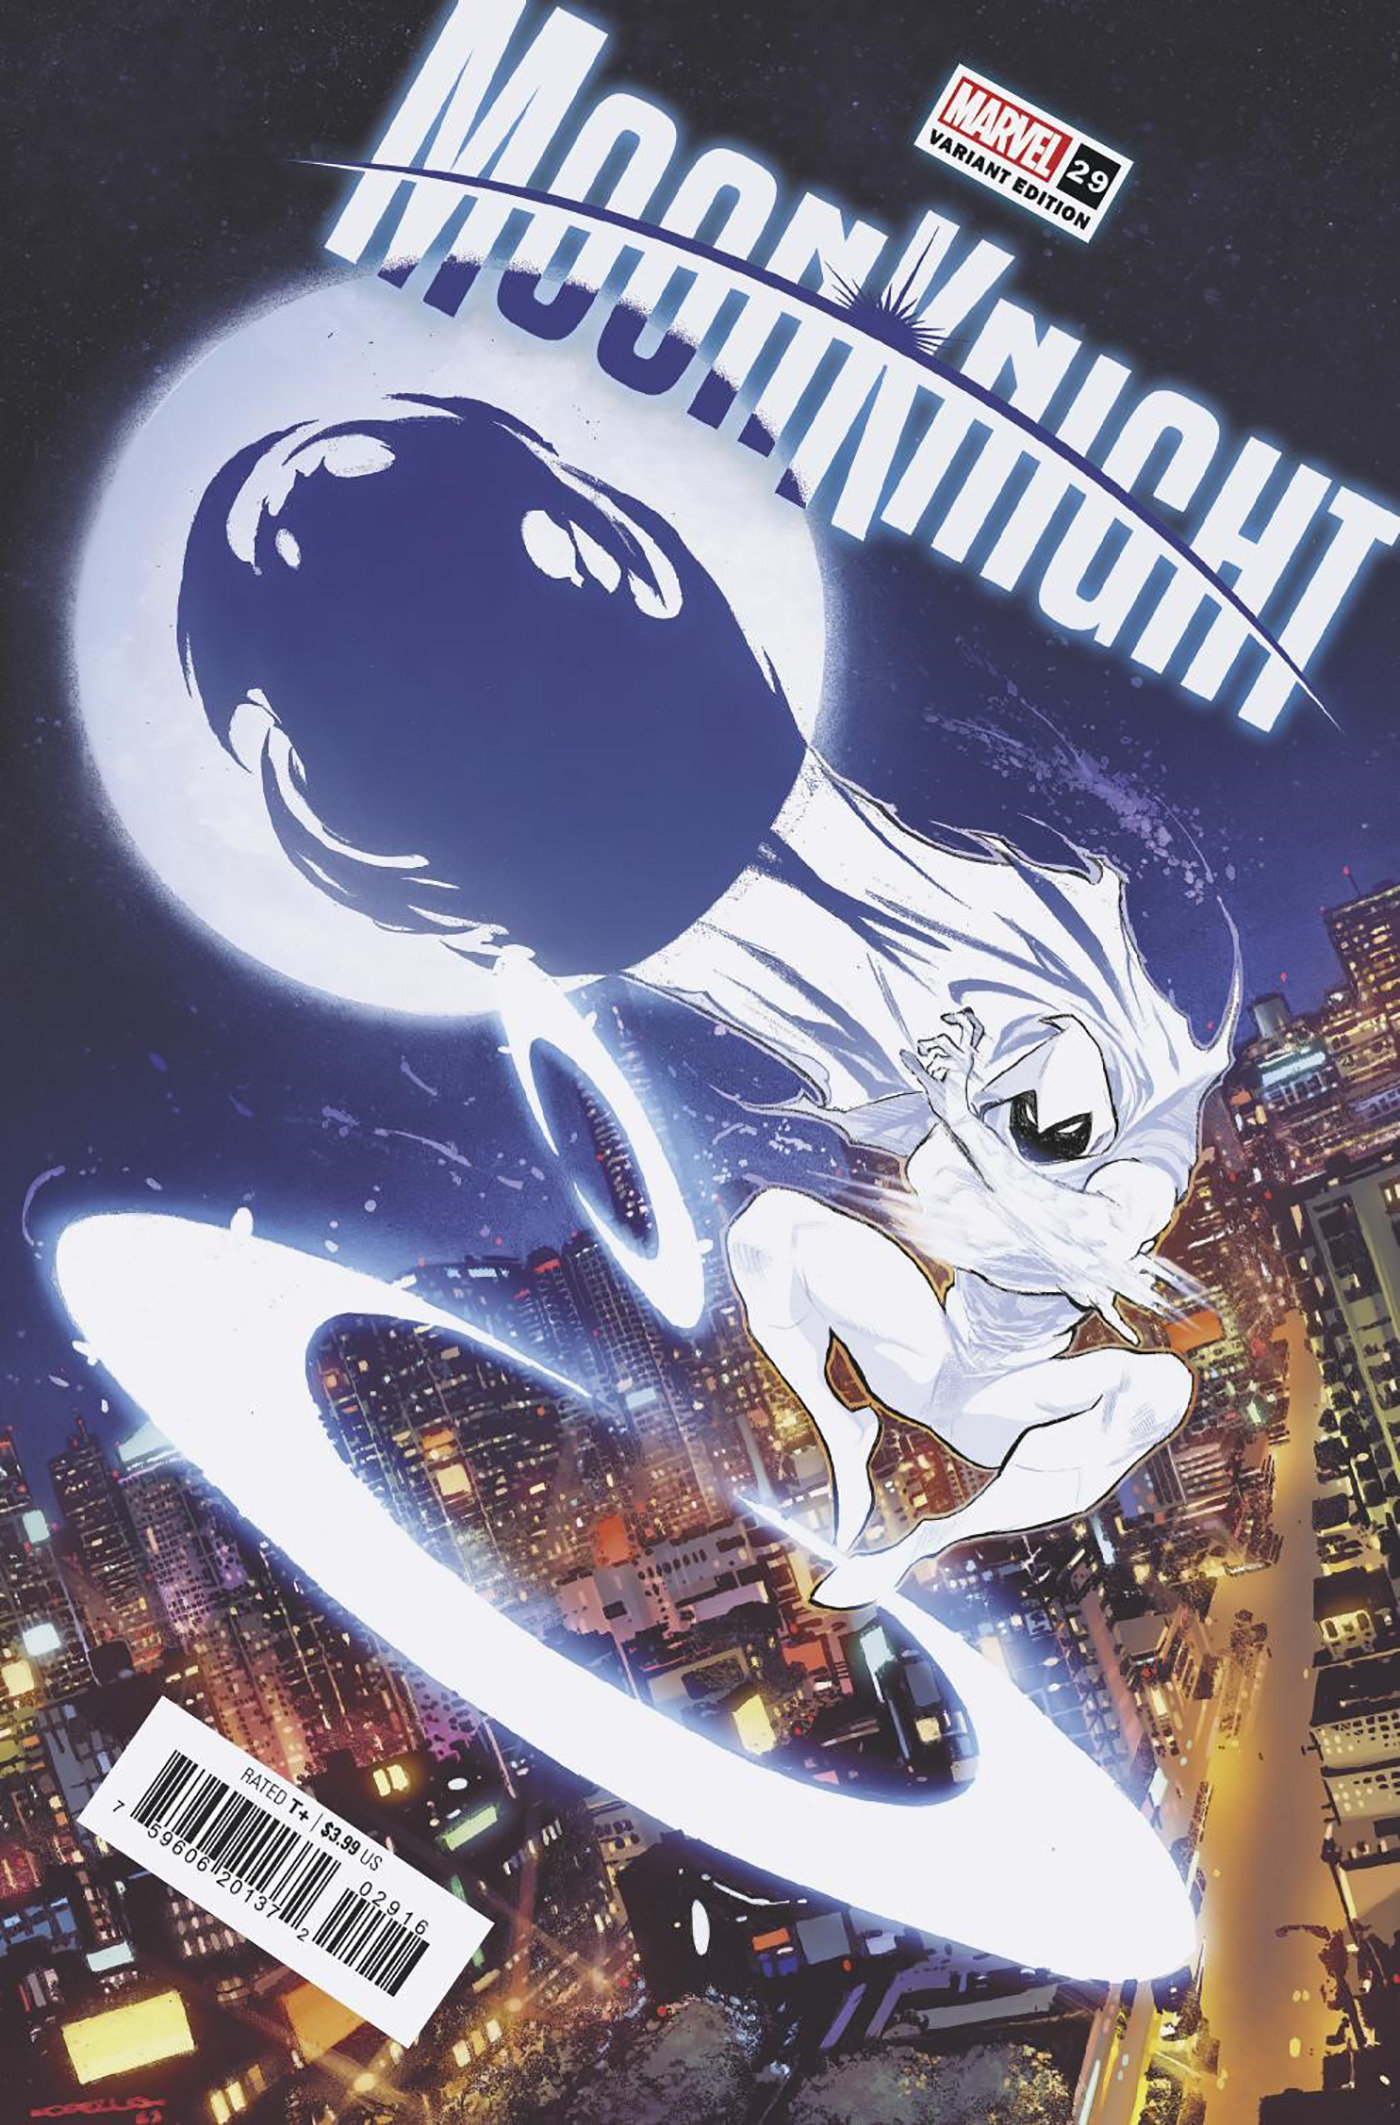 Moon Knight #29 Iban Coello Variant 1 for 25 Incentive (2021)